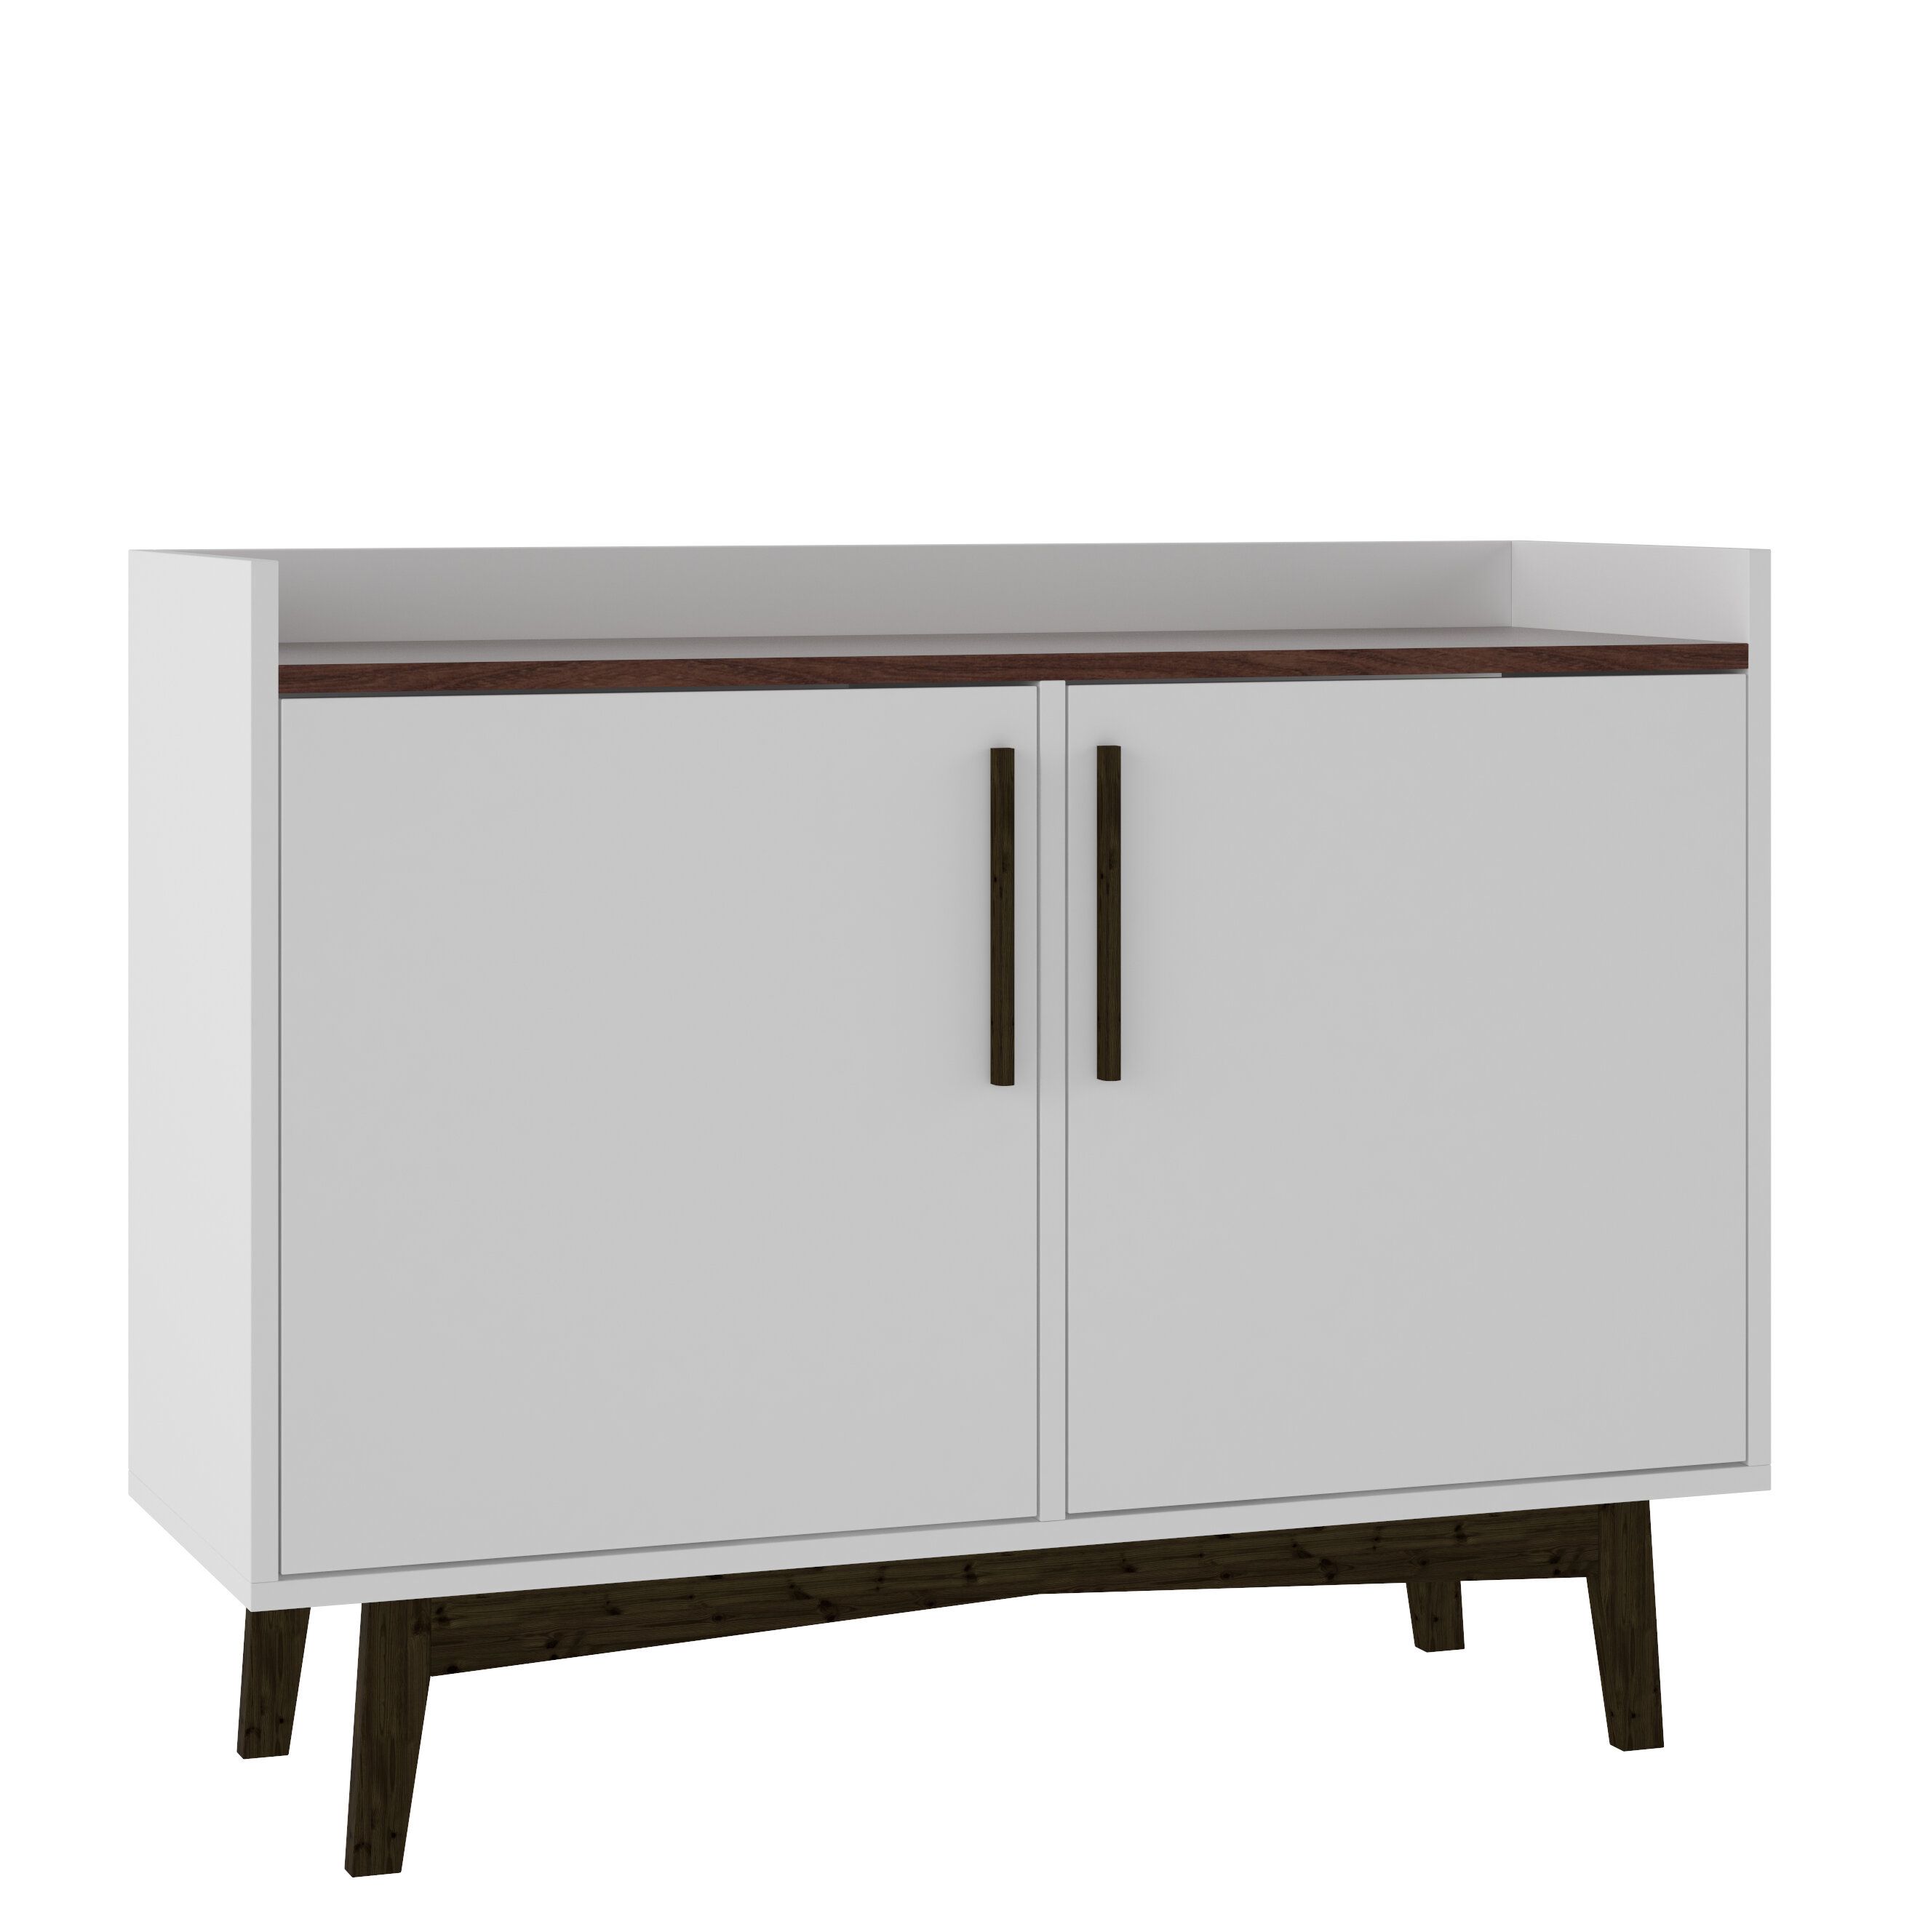 Headrick Mid Century Modern Sideboard Within Mid Century Brown Sideboards (View 20 of 30)